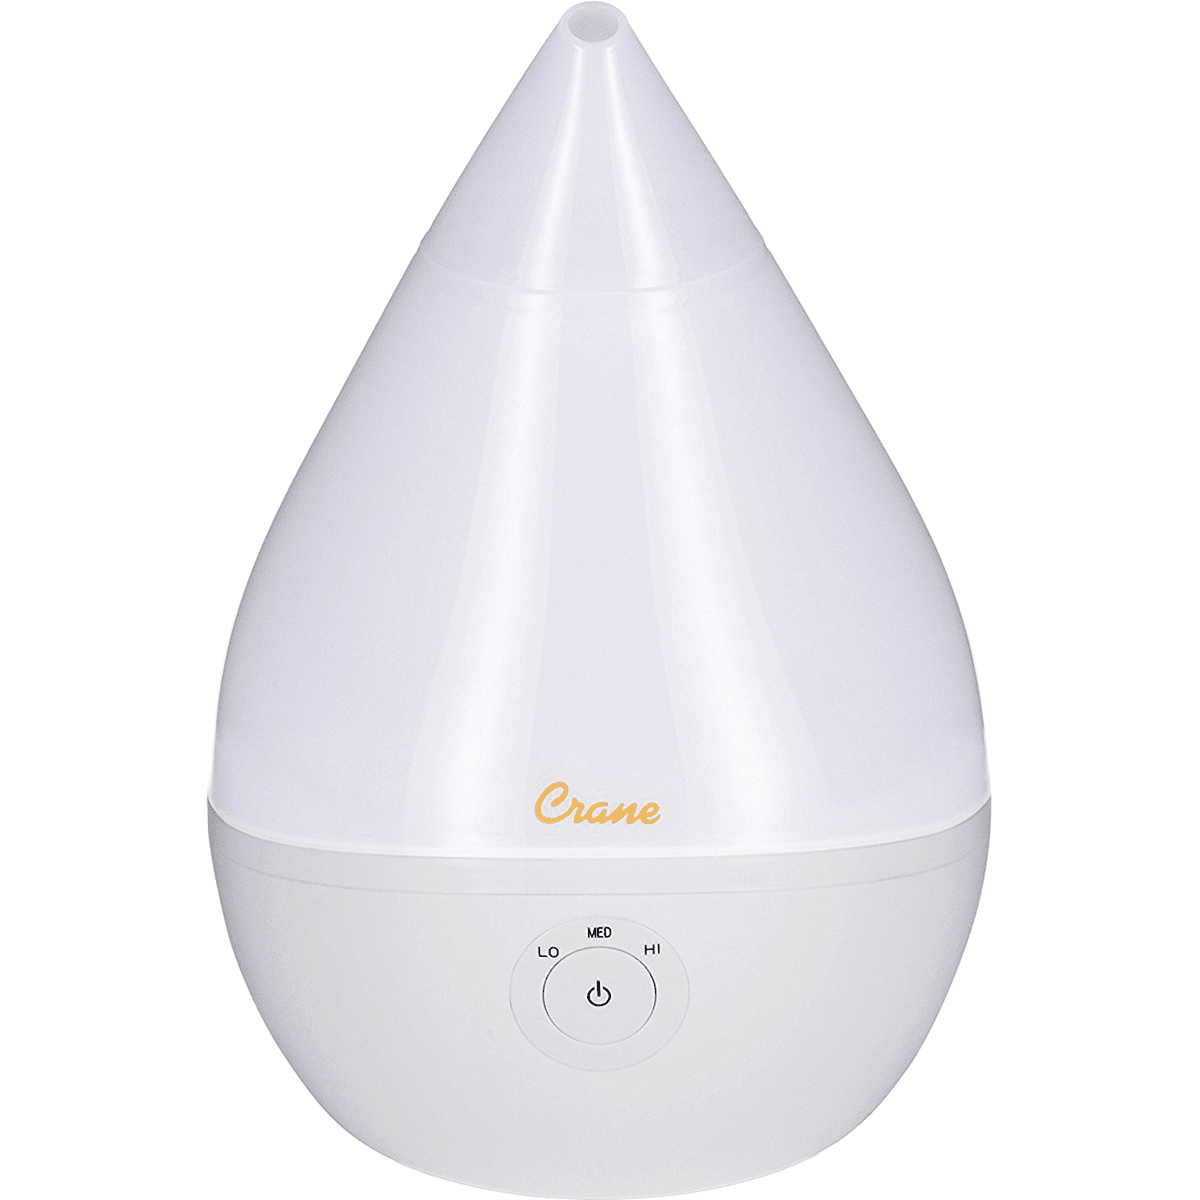 Crane Droplet Cool Mist Humidifier - White